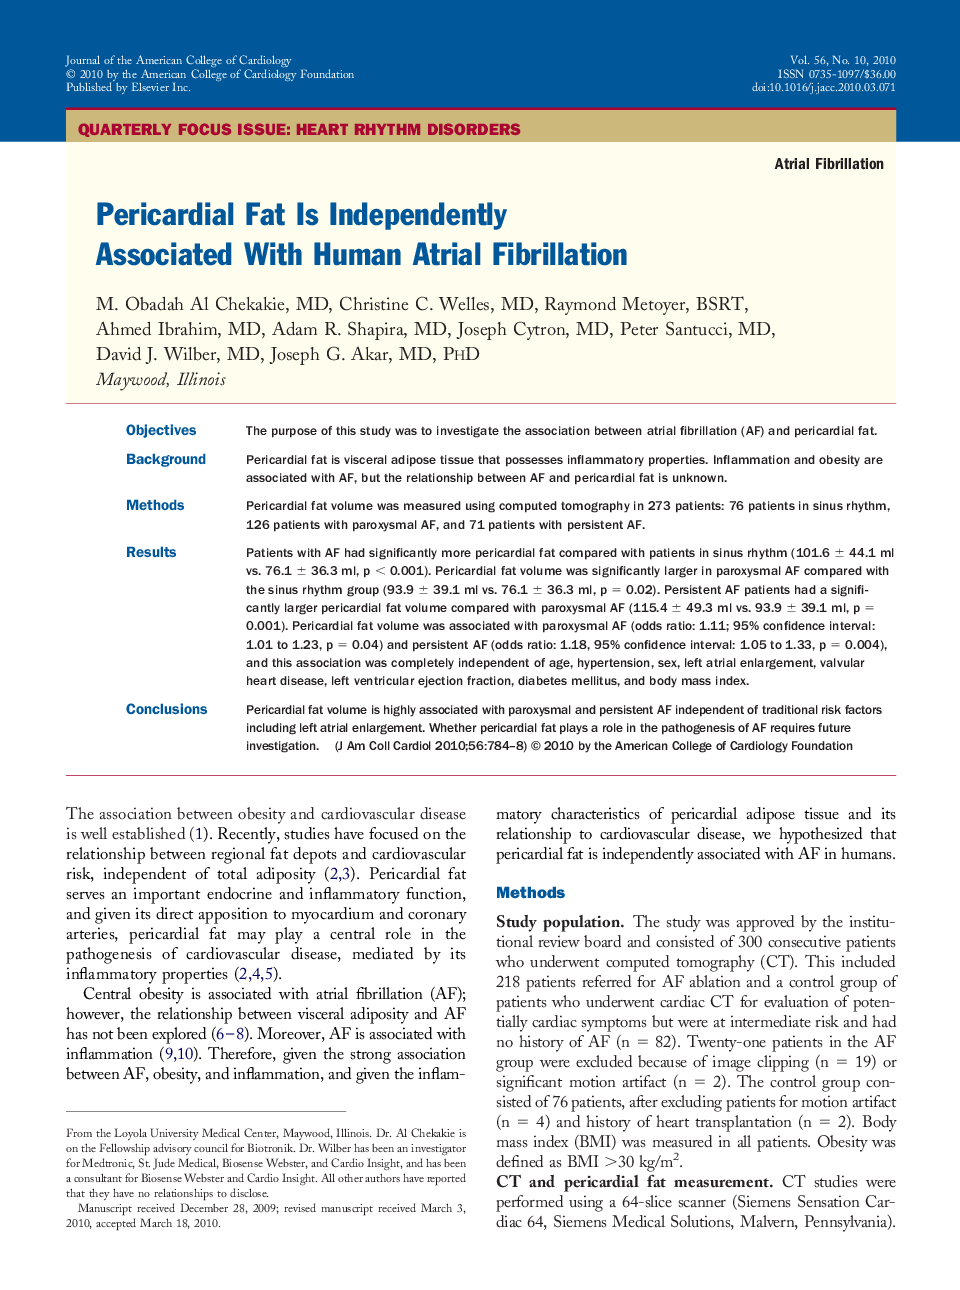 Pericardial Fat Is Independently Associated With Human Atrial Fibrillation 